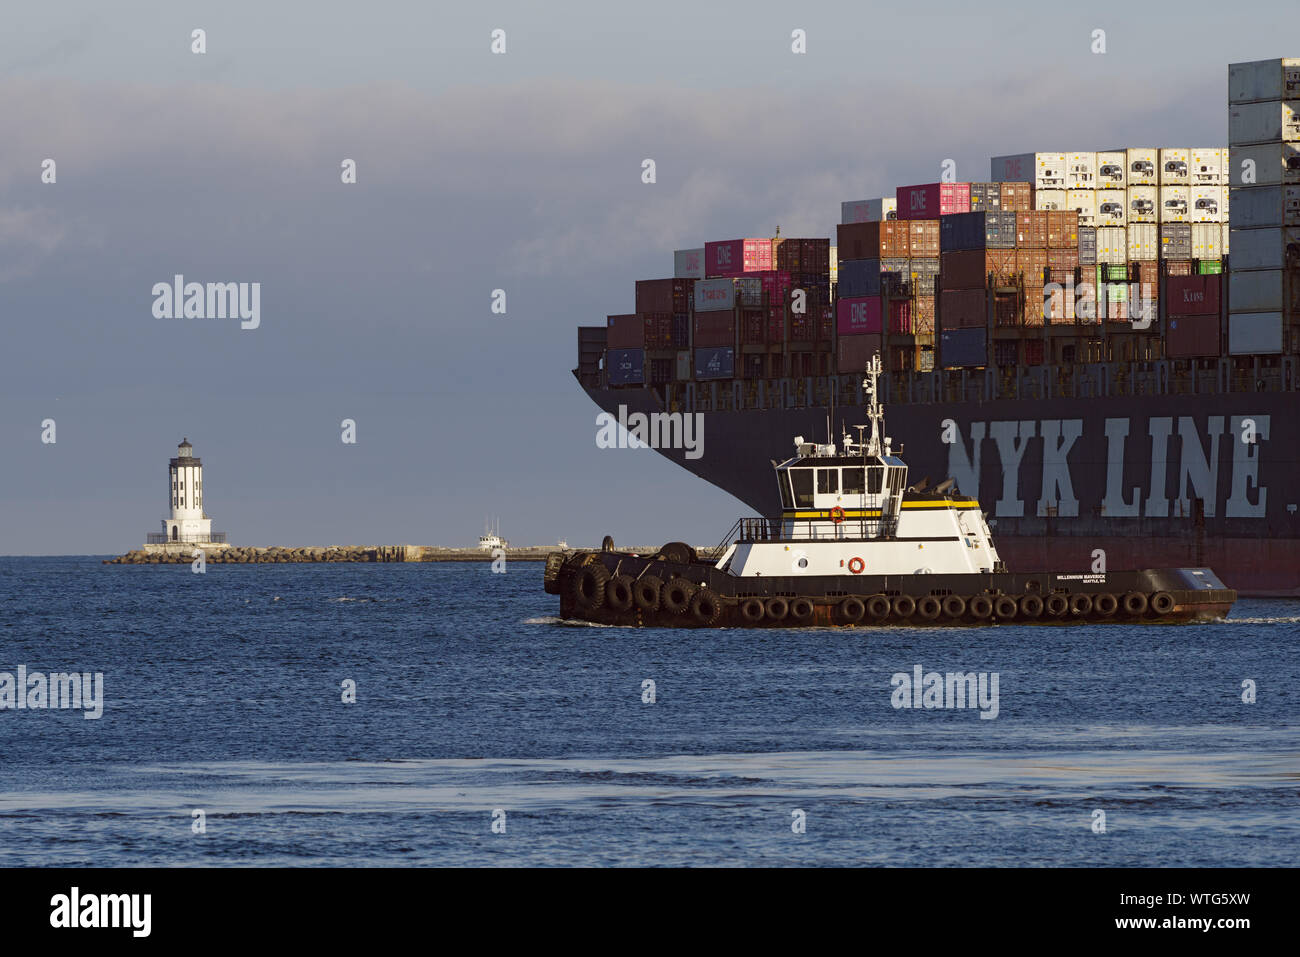 Image showing an NYK Line container ship departing from the Port of Los Angeles as well as a tugboat and the Angeles Harbor Light. Stock Photo